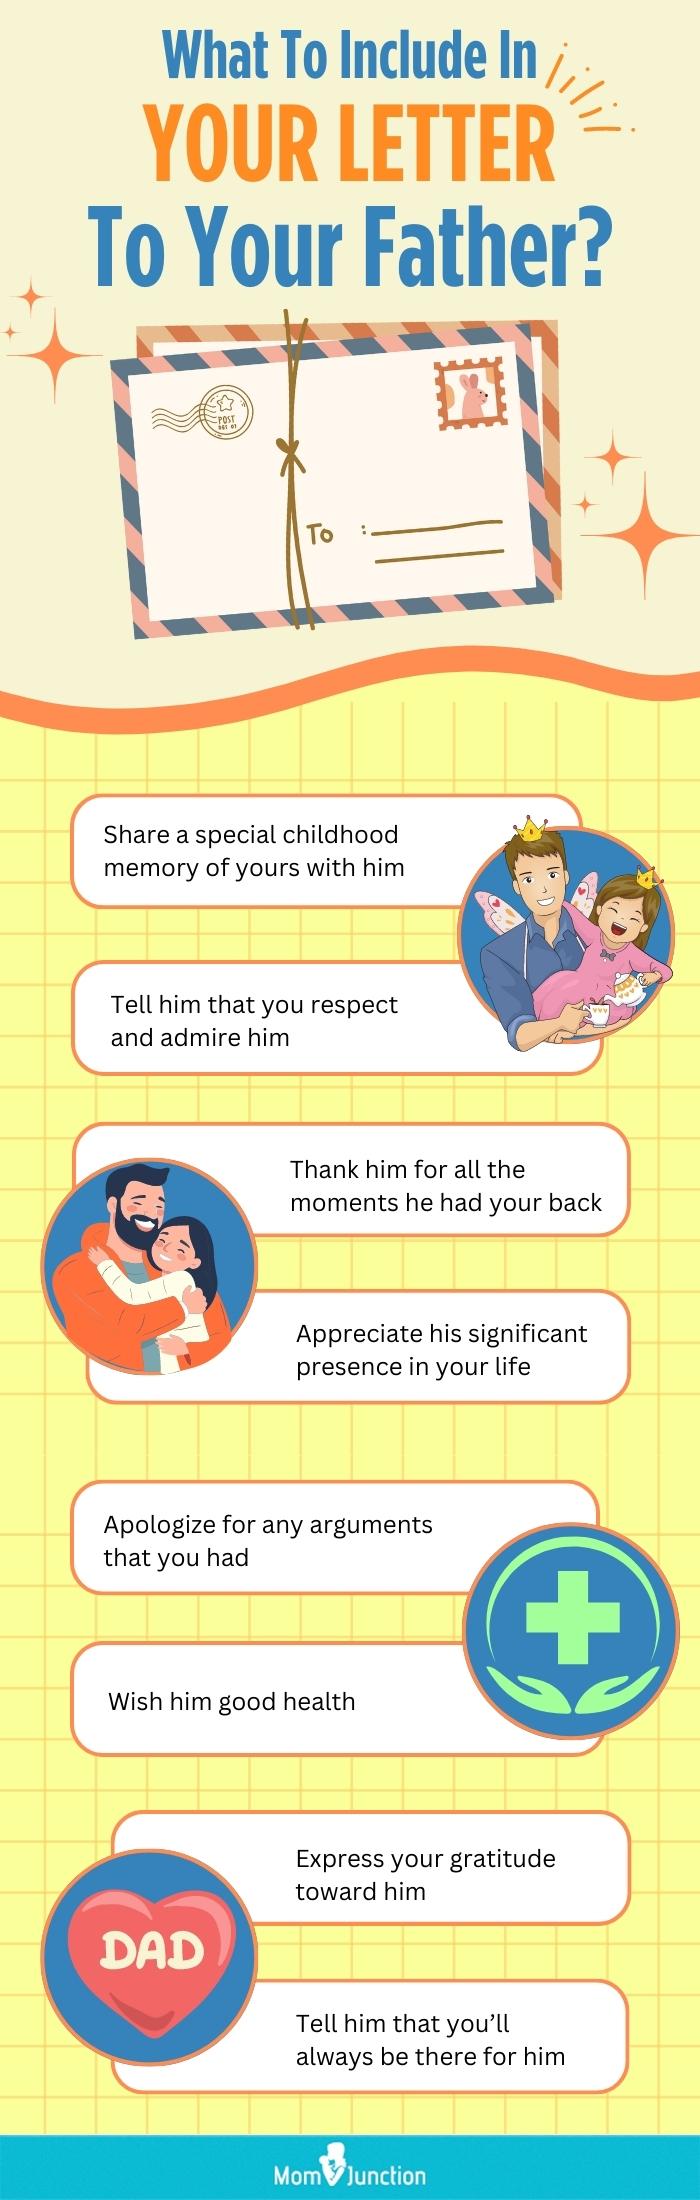  what to include in your letter to your father (infographic)